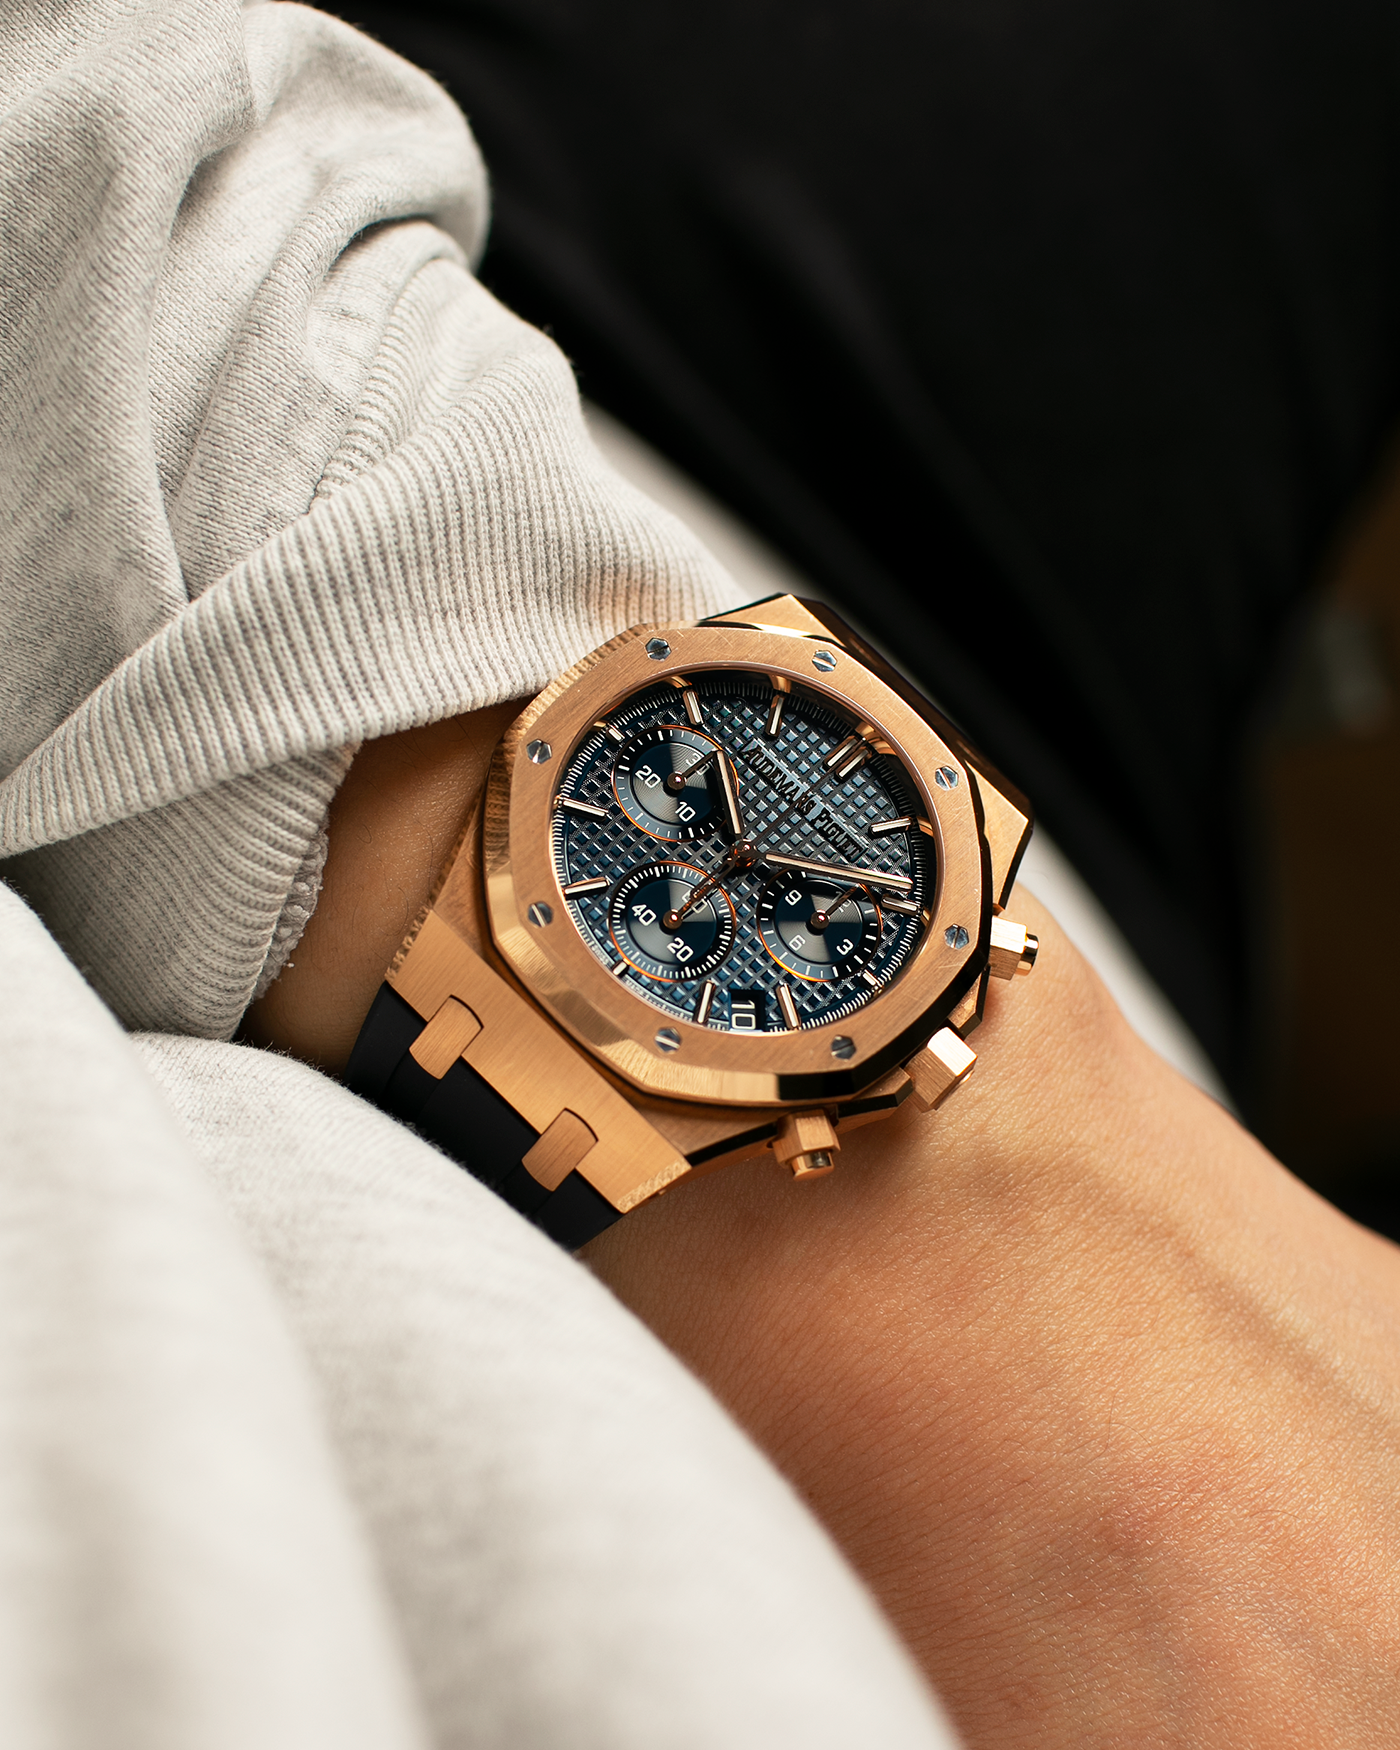 Brand: Audemars Piguet Year: 2022 Model: Royal Oak Chronograph, 50th Anniversary Edition Reference Number: 26240OR.OO.D315CR.01 Material: 18-carat Rose Gold Movement: Audemars Piguet Cal. 4401, Self-Winding Case Dimensions: 41mm x 12.4mm Strap: Audemars Piguet Black Rubber Strap with Signed 18-carat Rose Gold Deployant Clasp, extra Audemars Piguet Blue Alligator Leather Strap